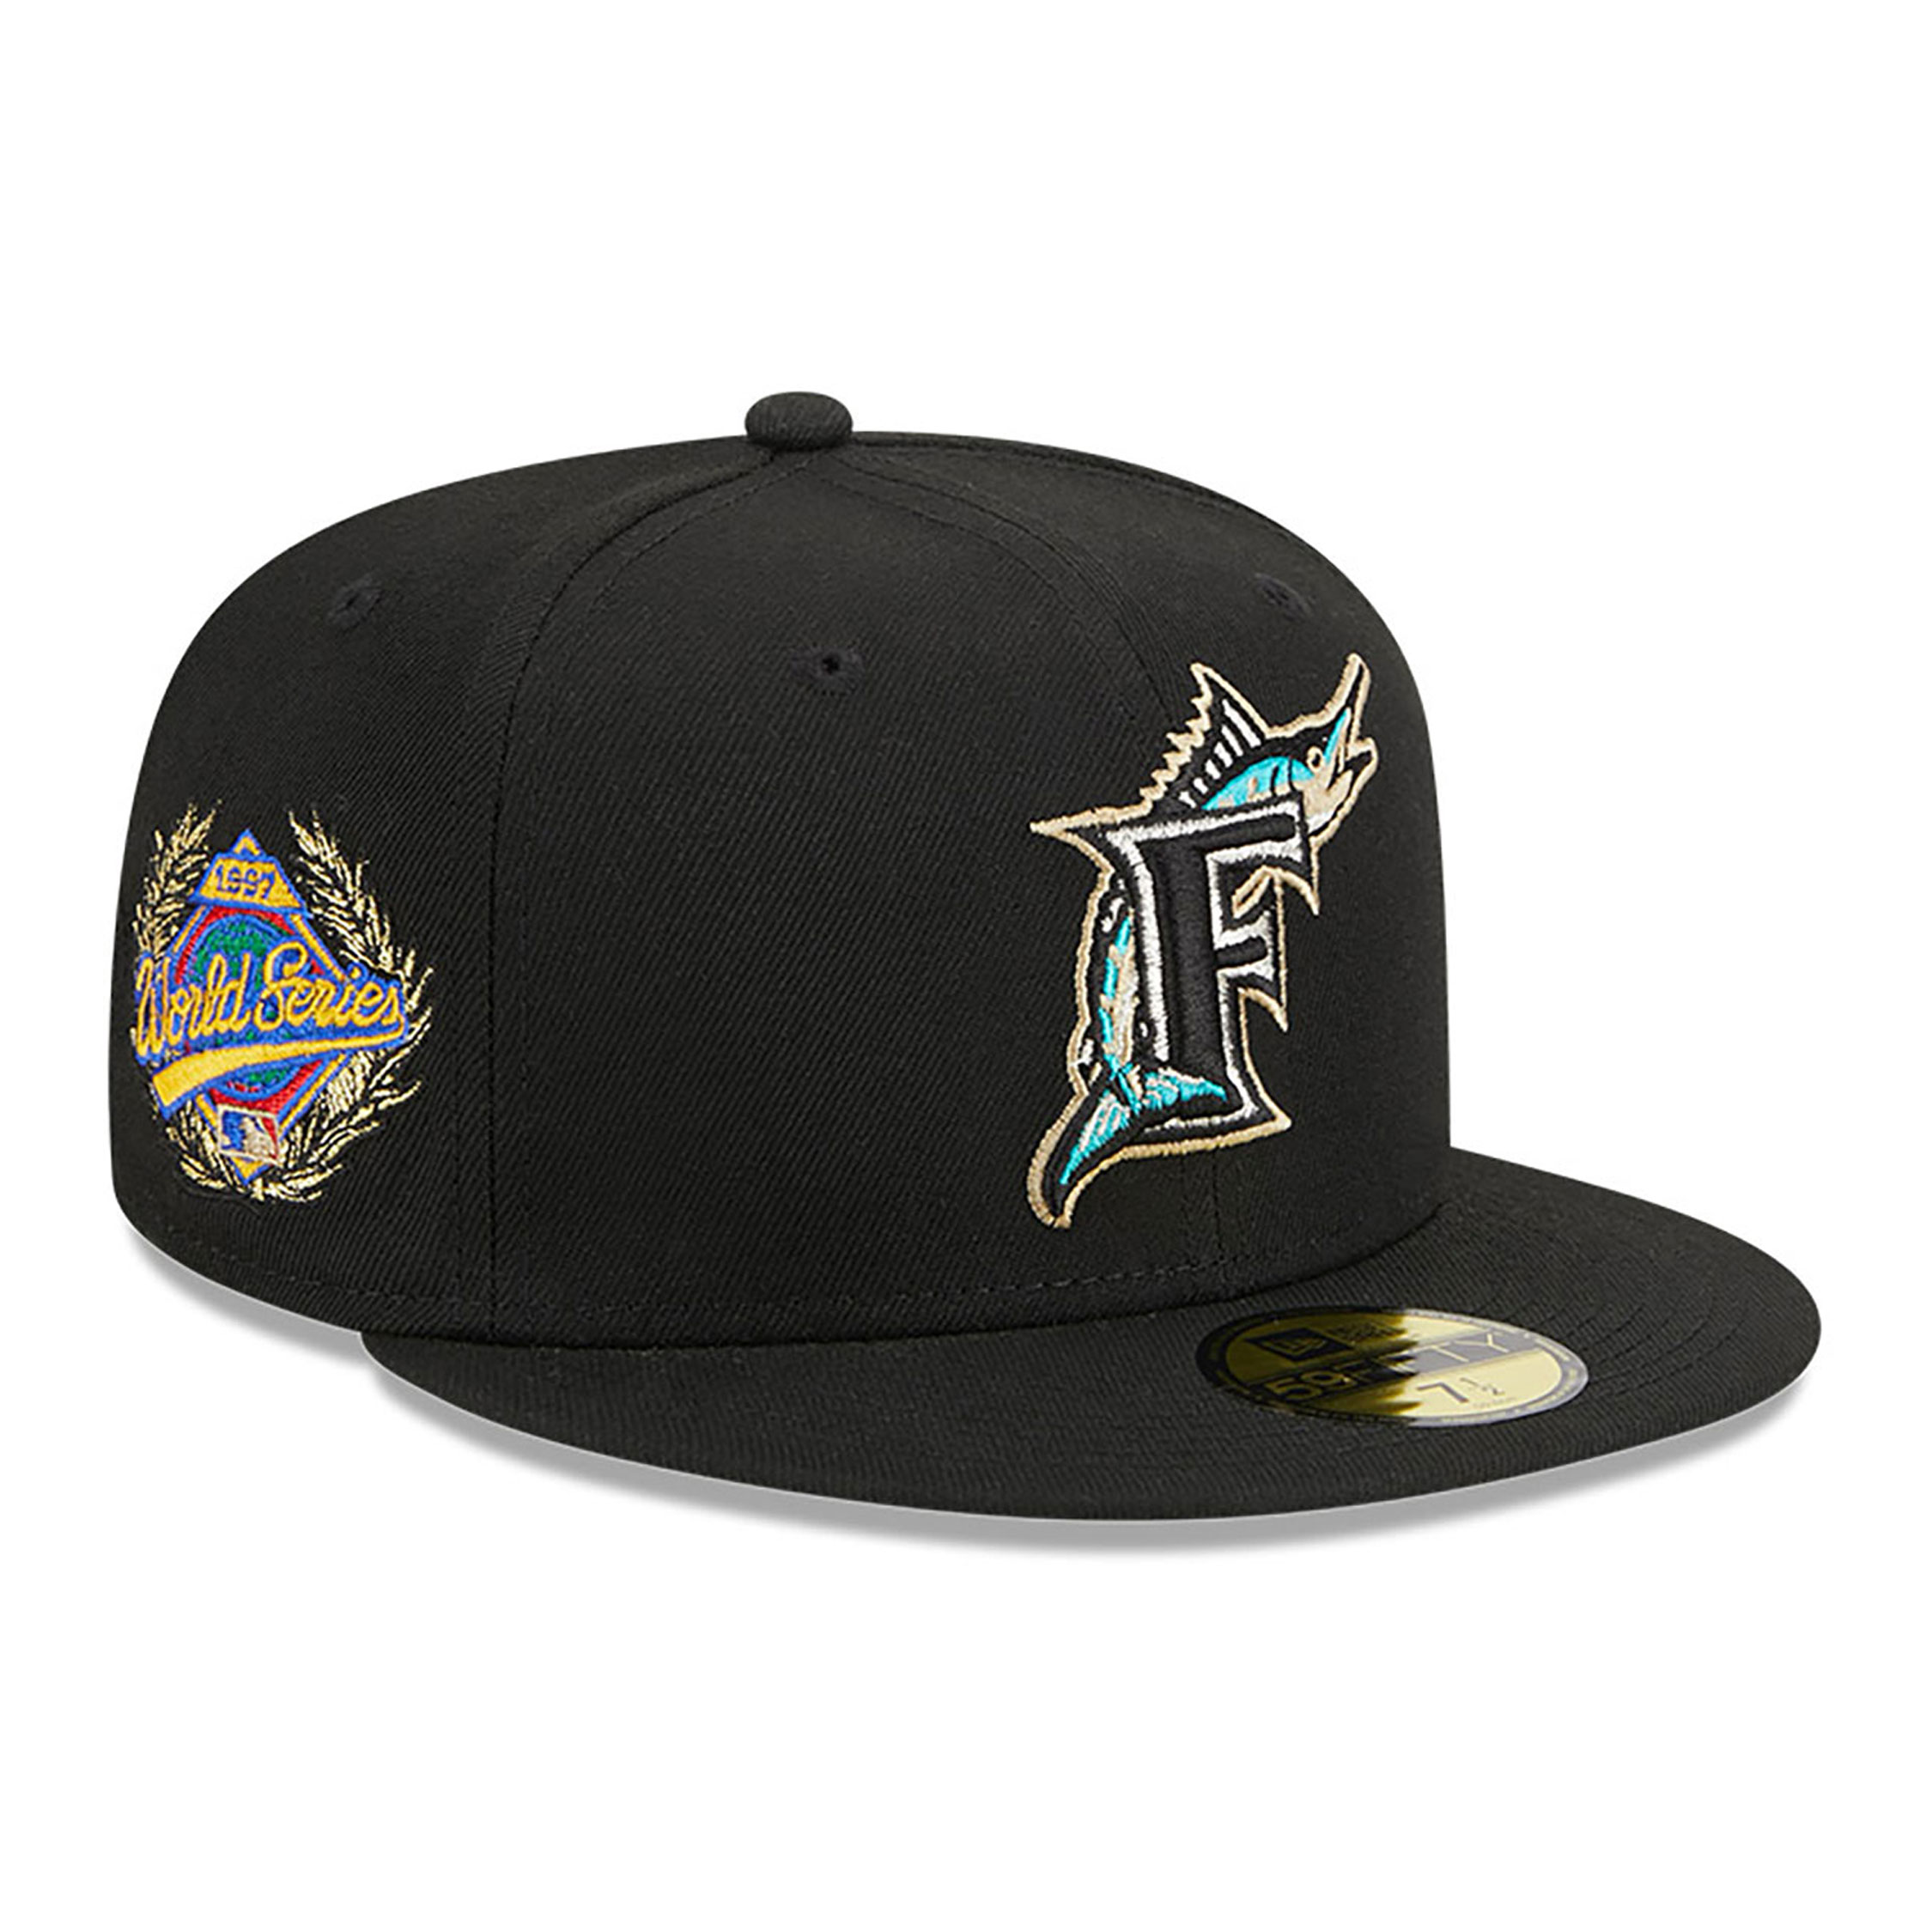 Miami Marlins Laurel Sidepatch Black 59FIFTY Fitted Cap